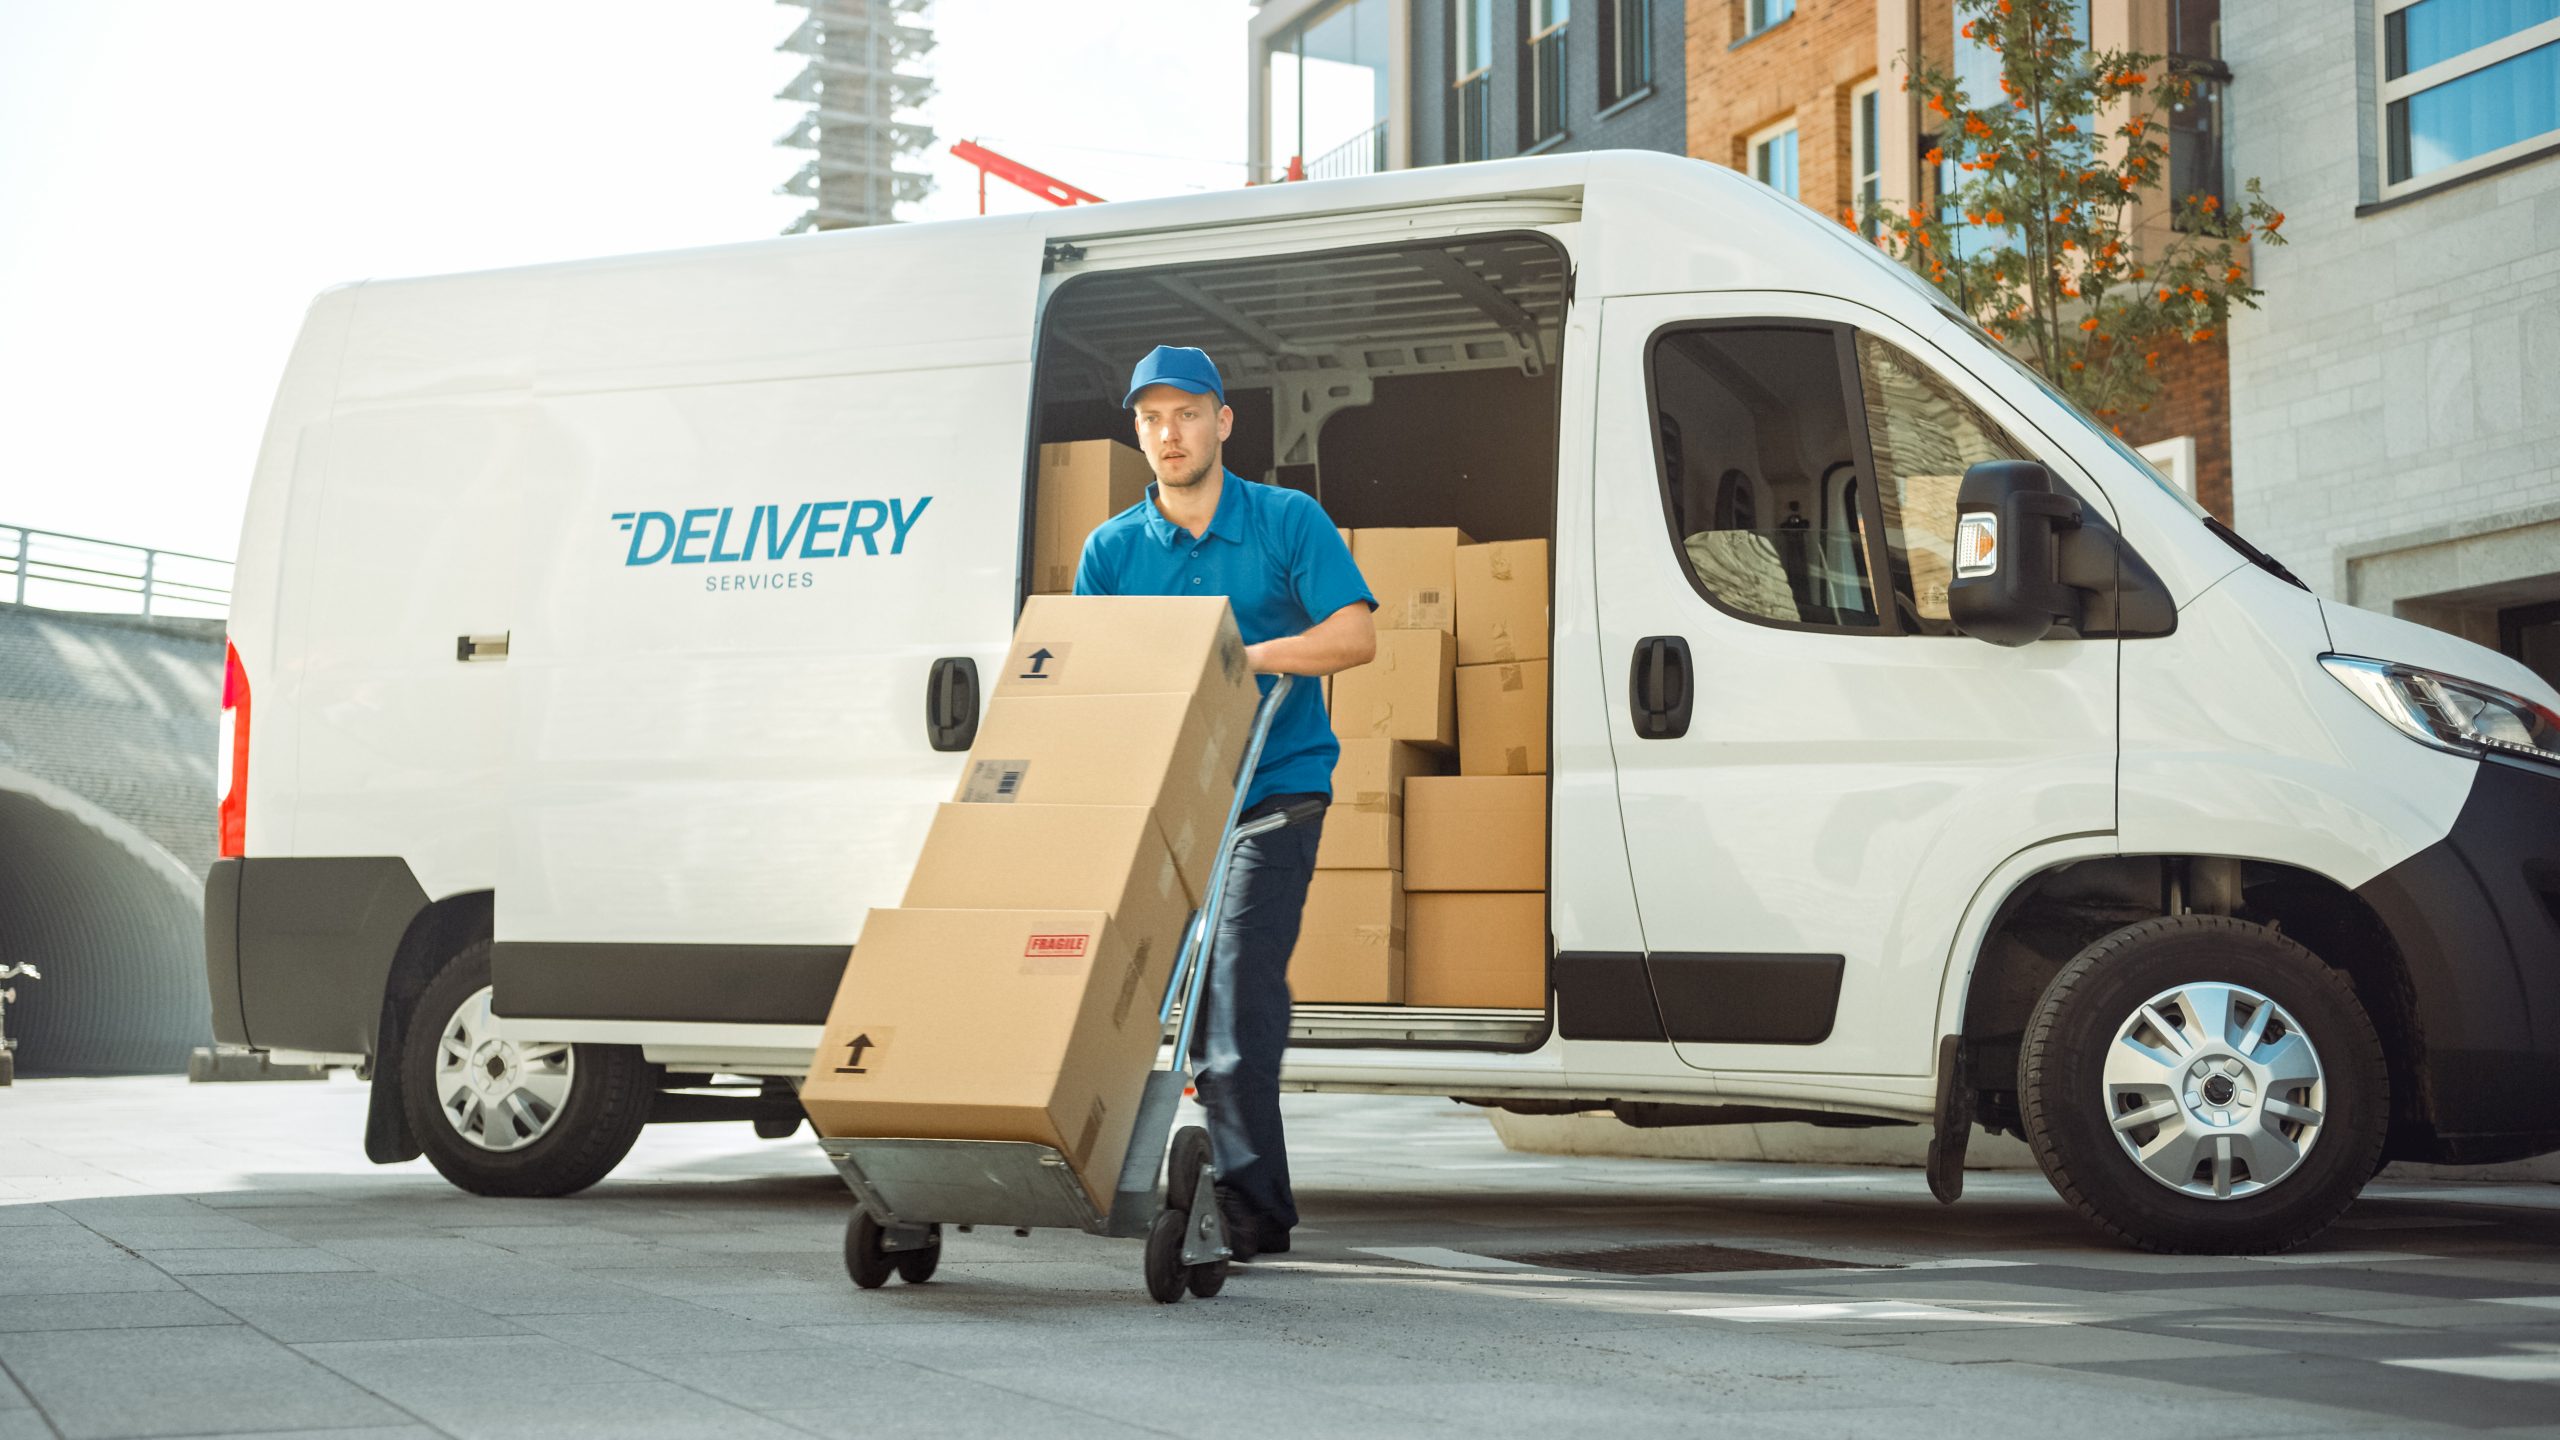 Freight Delivery Person With Van